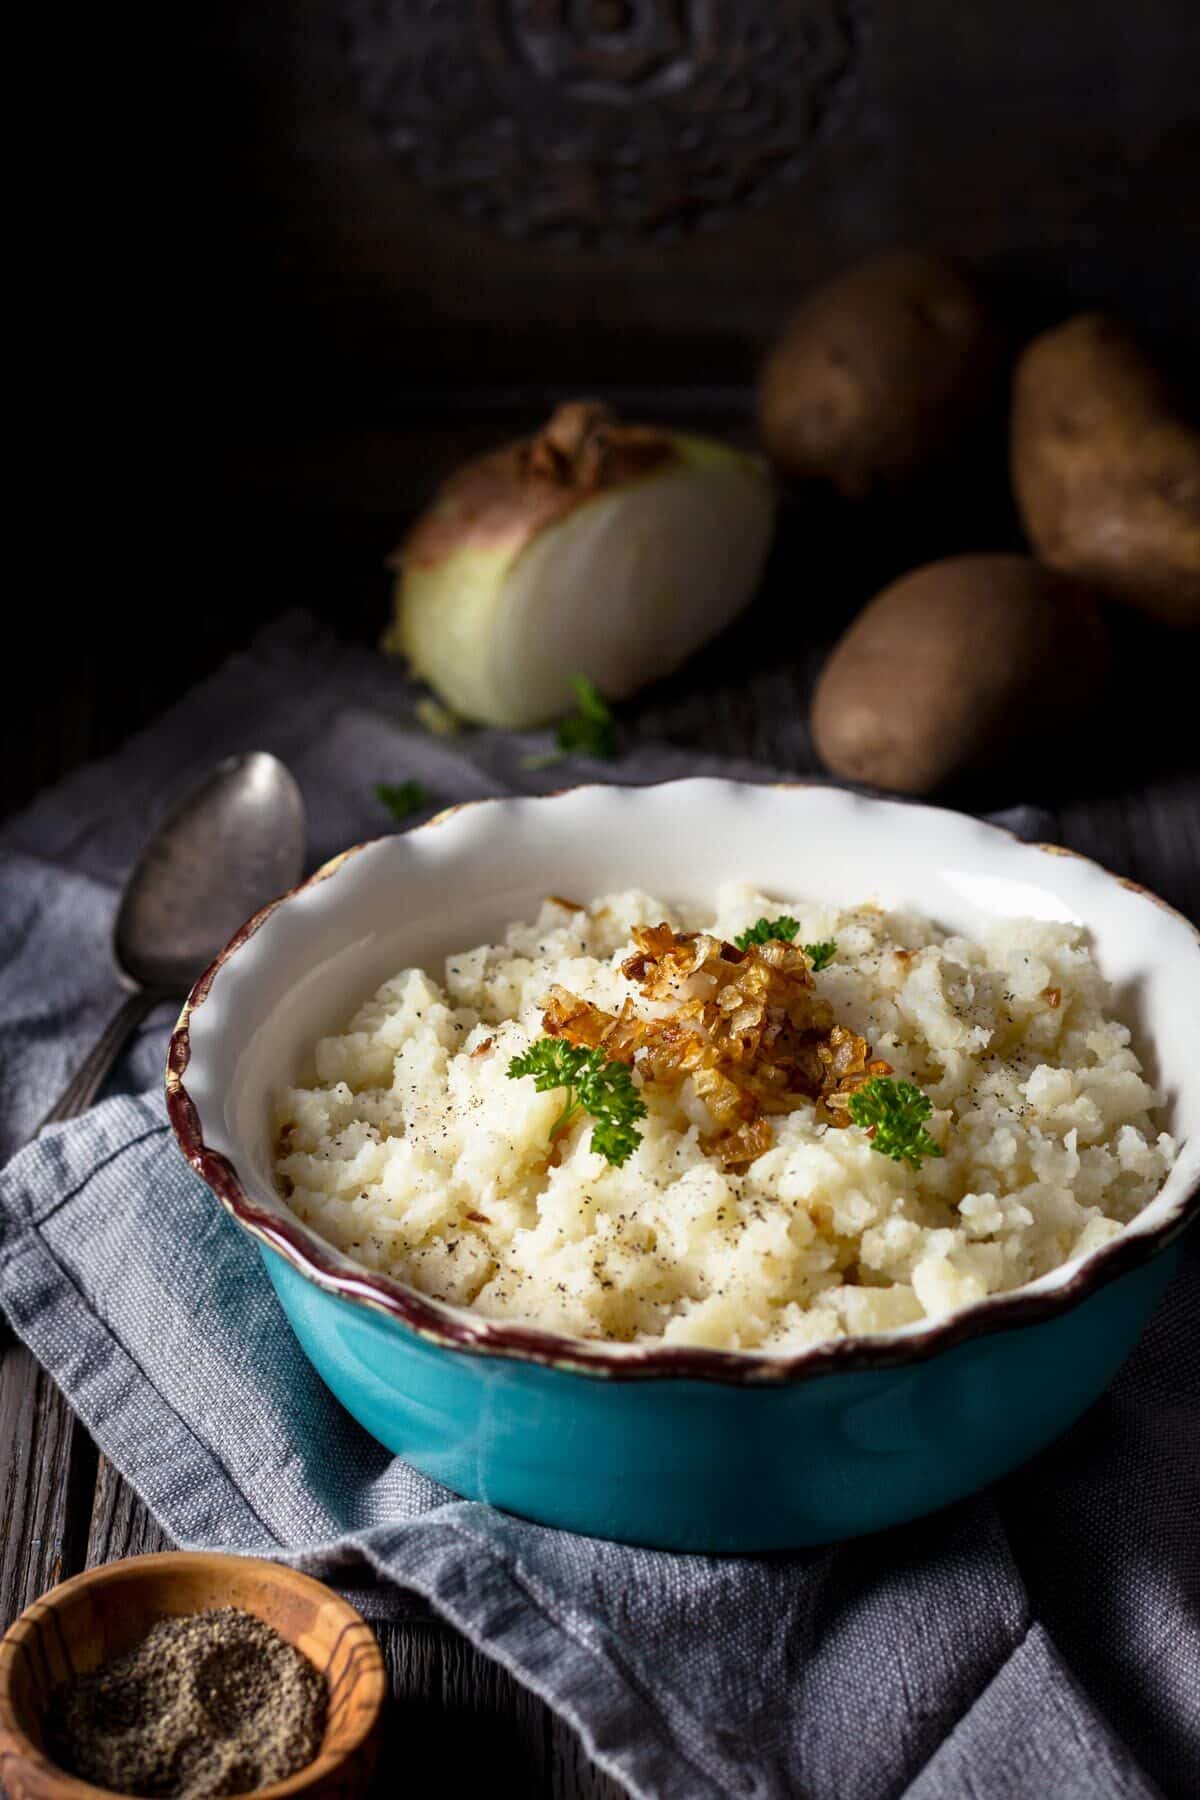 Dairy-free mashed potatoes in a bowl topped with caramelized onions.